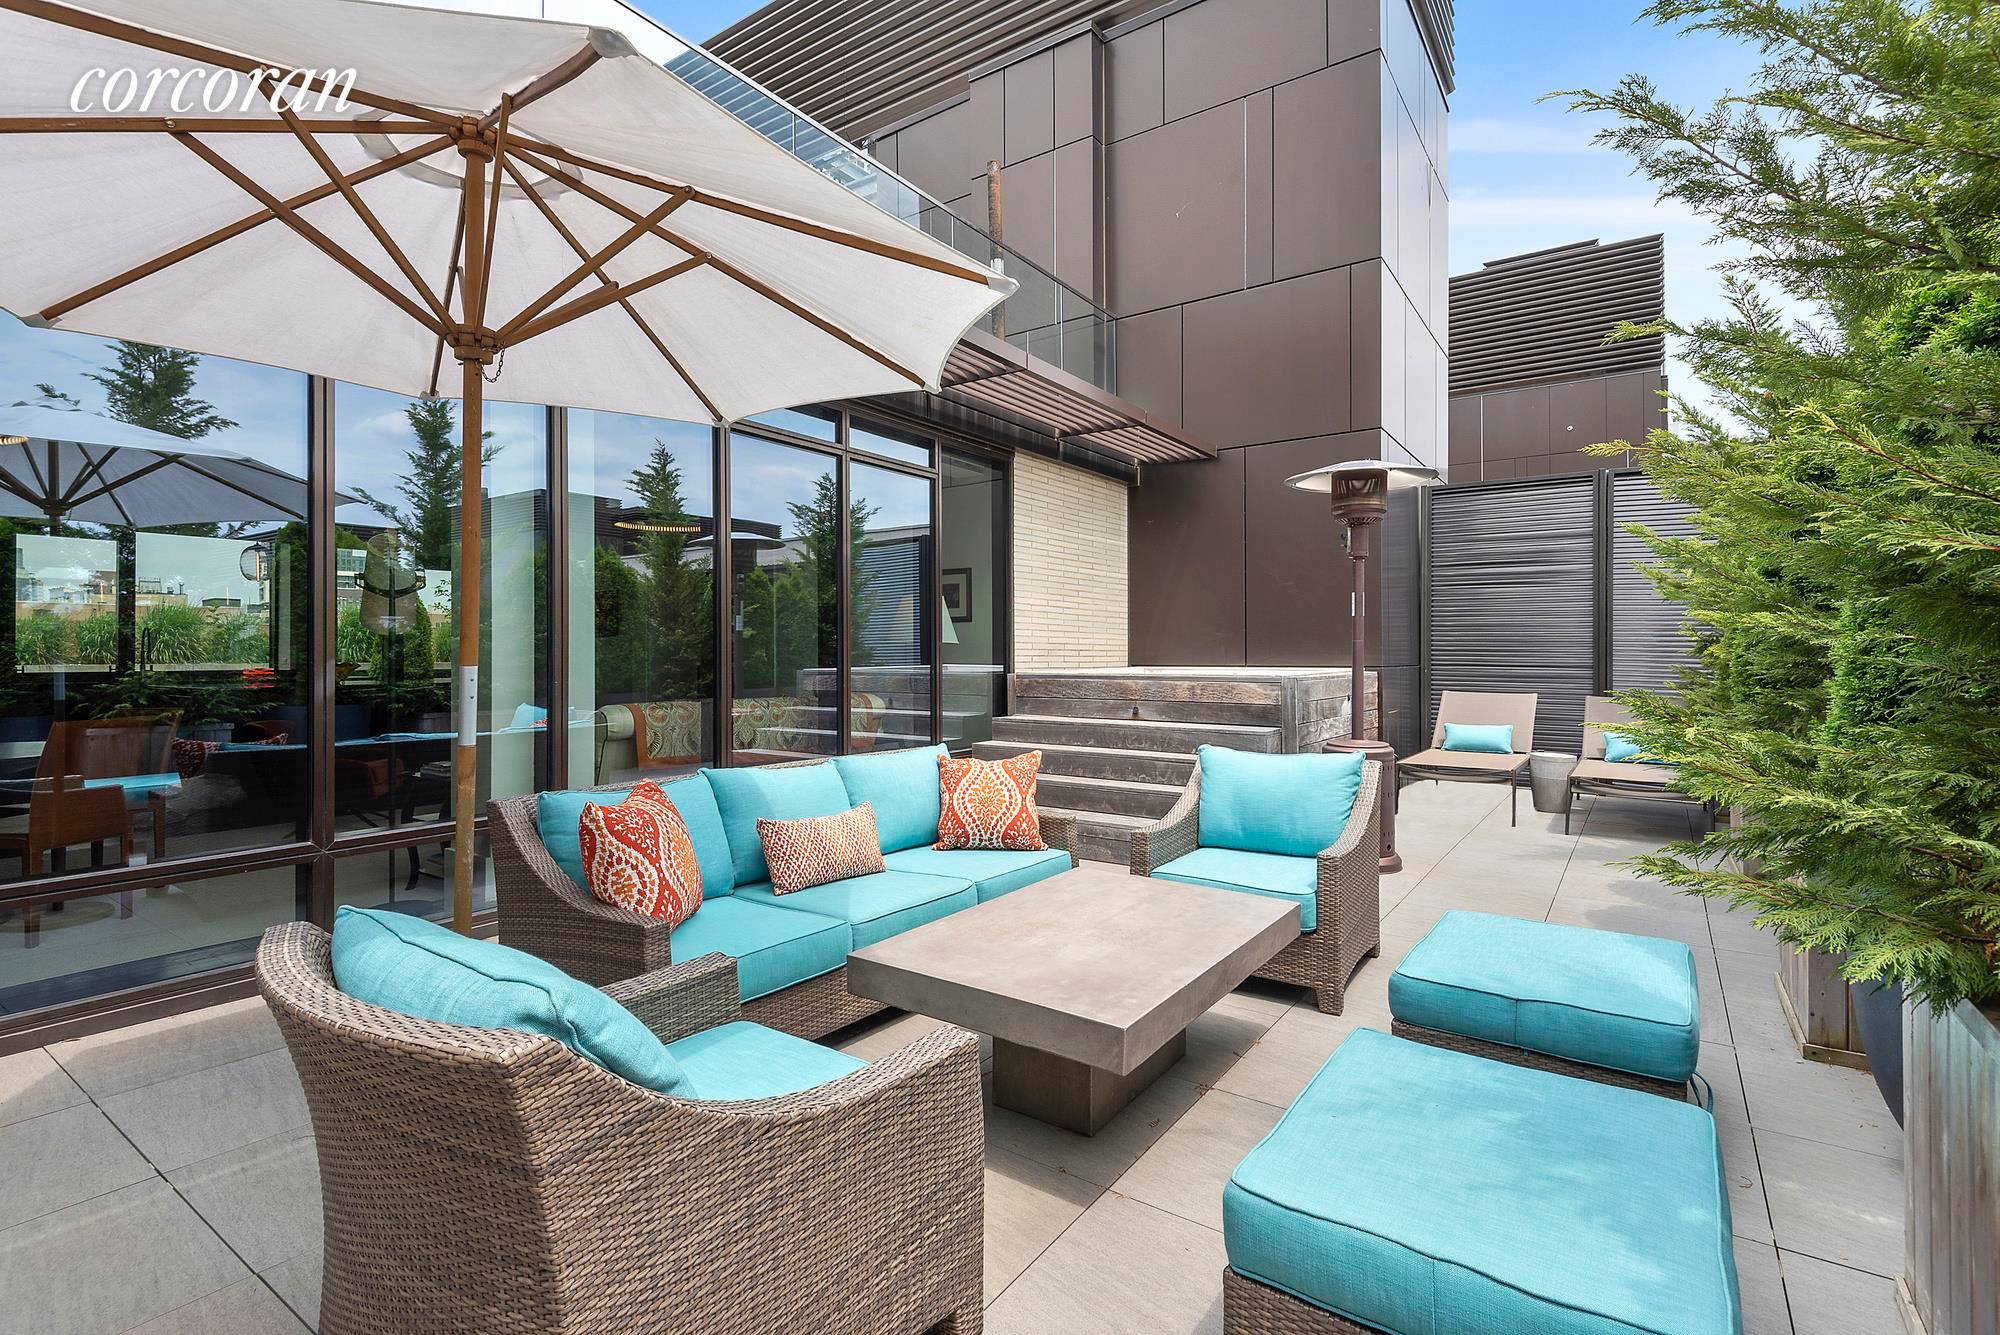 Penthouse 3 in WilliamsburgA s ultra luxe condo building The Oosten is a custom crafted home of 5, 100 interior square feet with an additional 1, 500sf of private outdoor ...